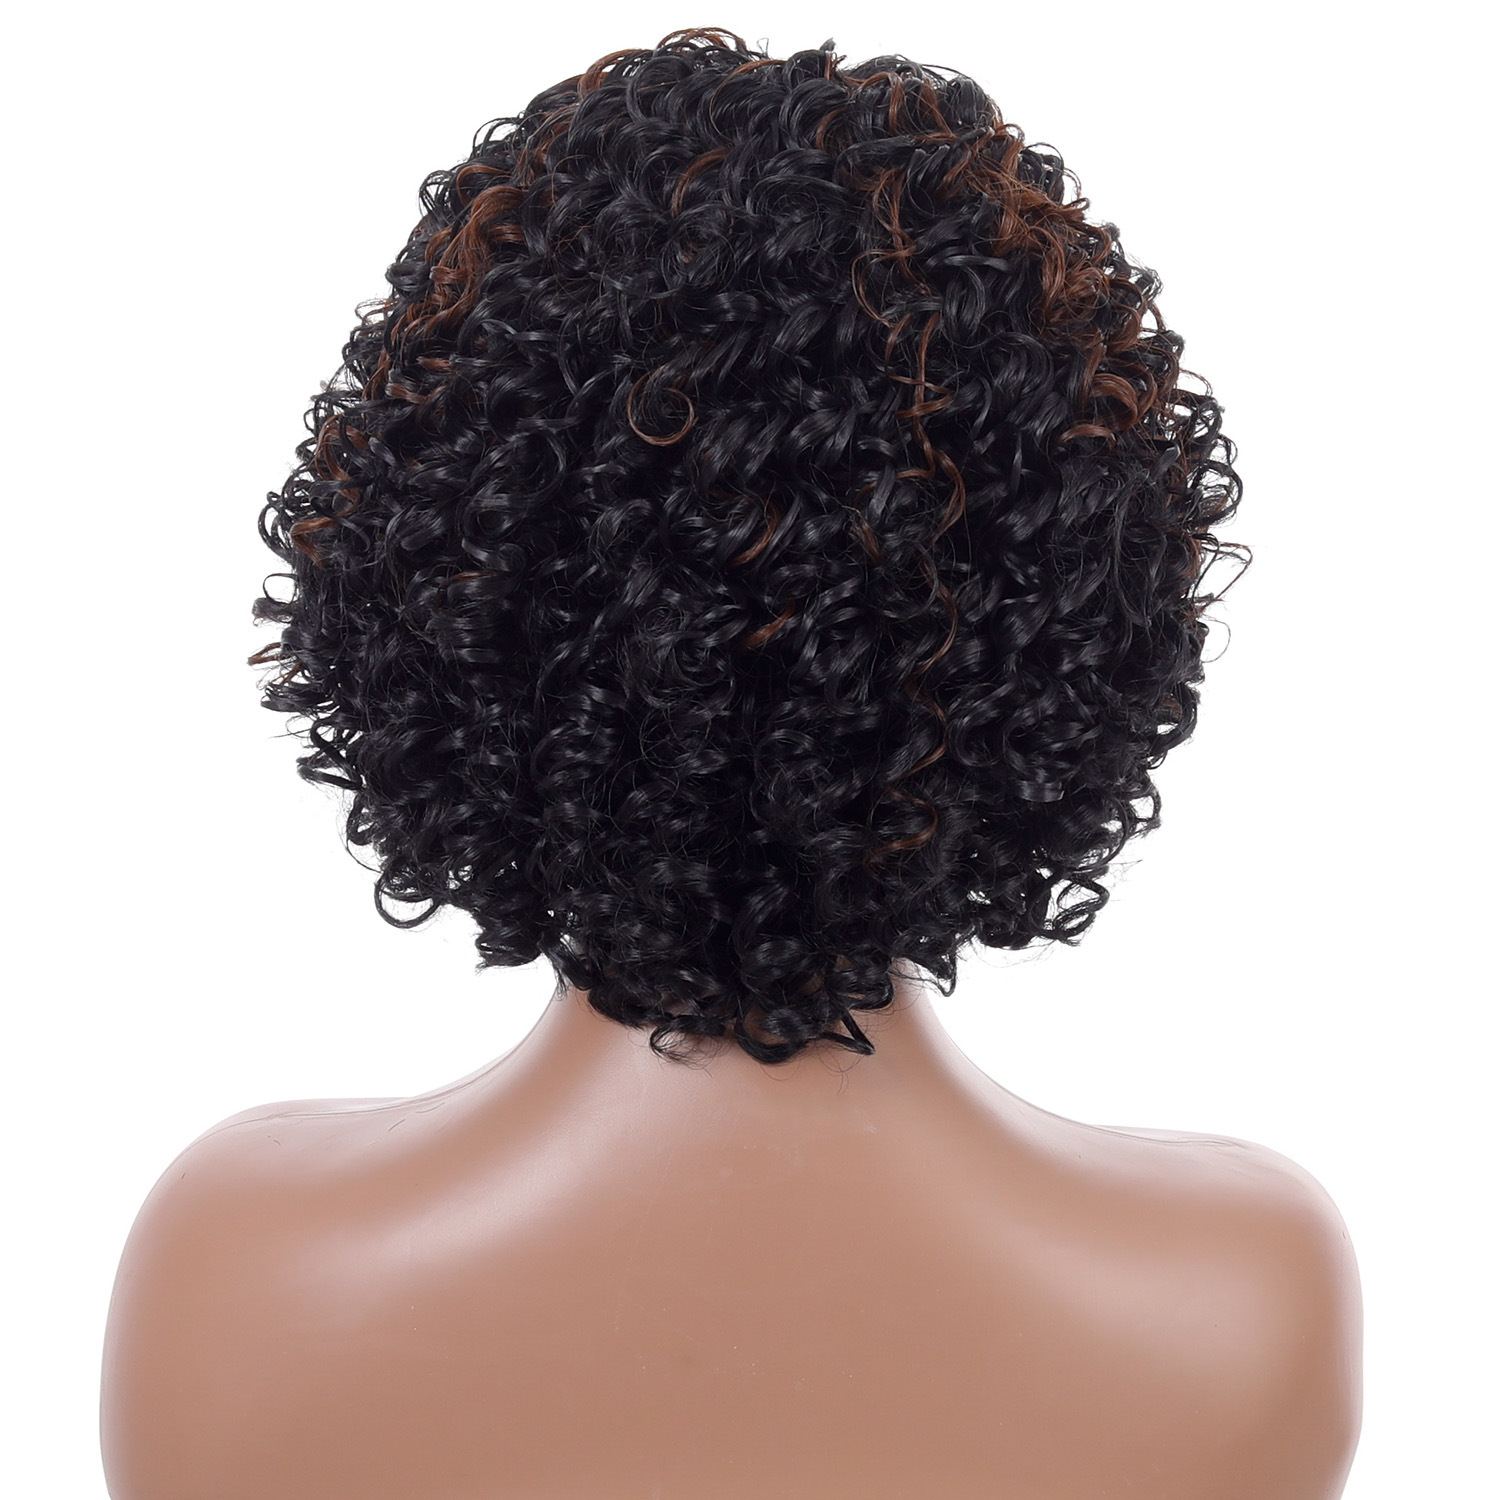 Headgear featuring afro small curly wig design for women, part of a black highlight brown short curly hair wig